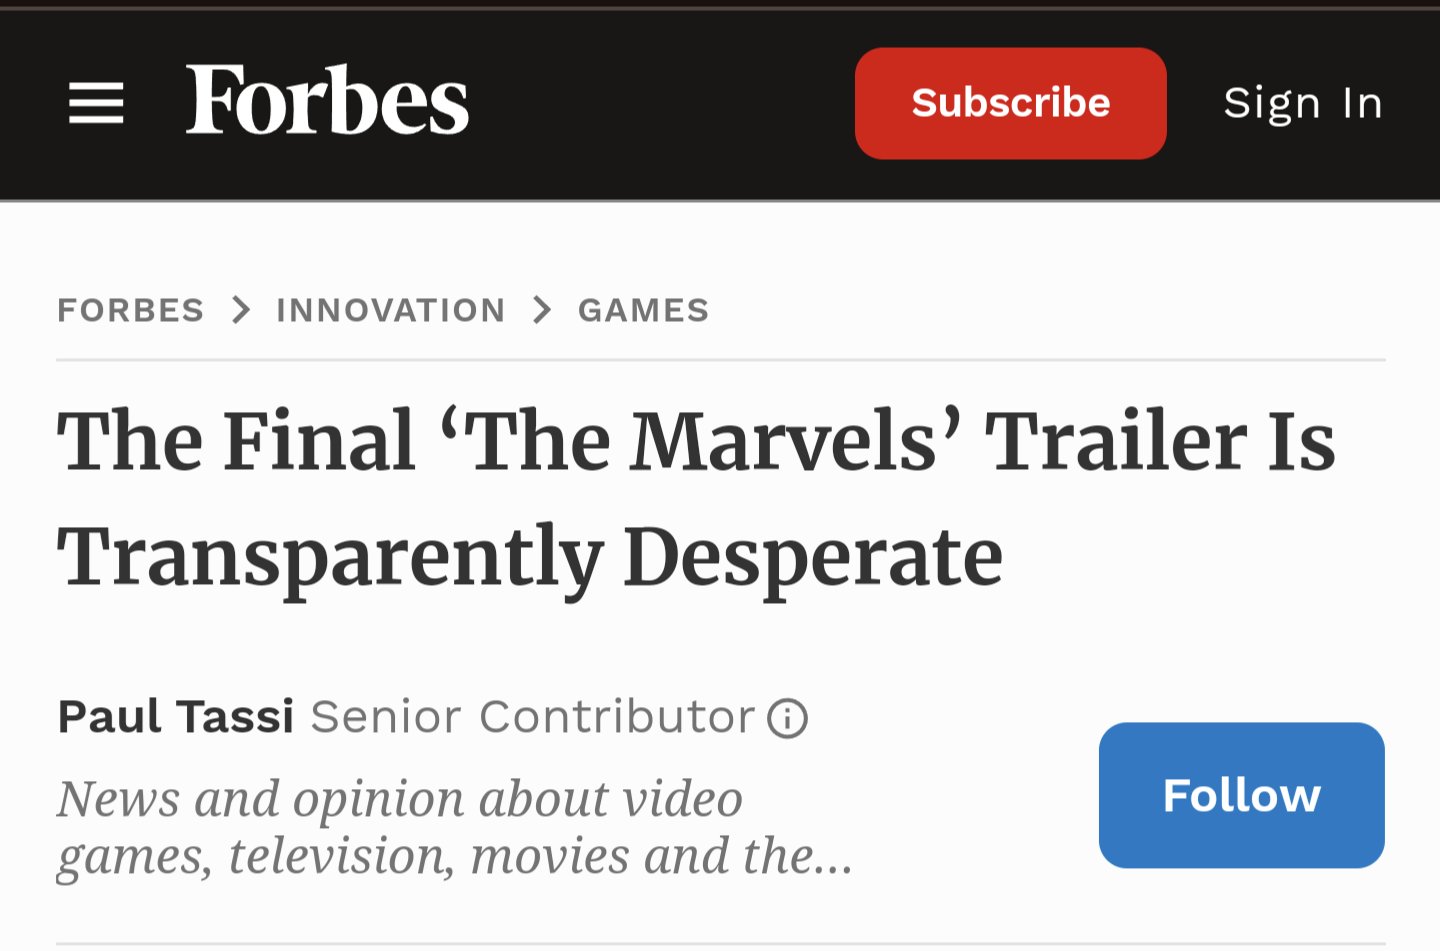 The Final 'The Marvels' Trailer Is Transparently Desperate